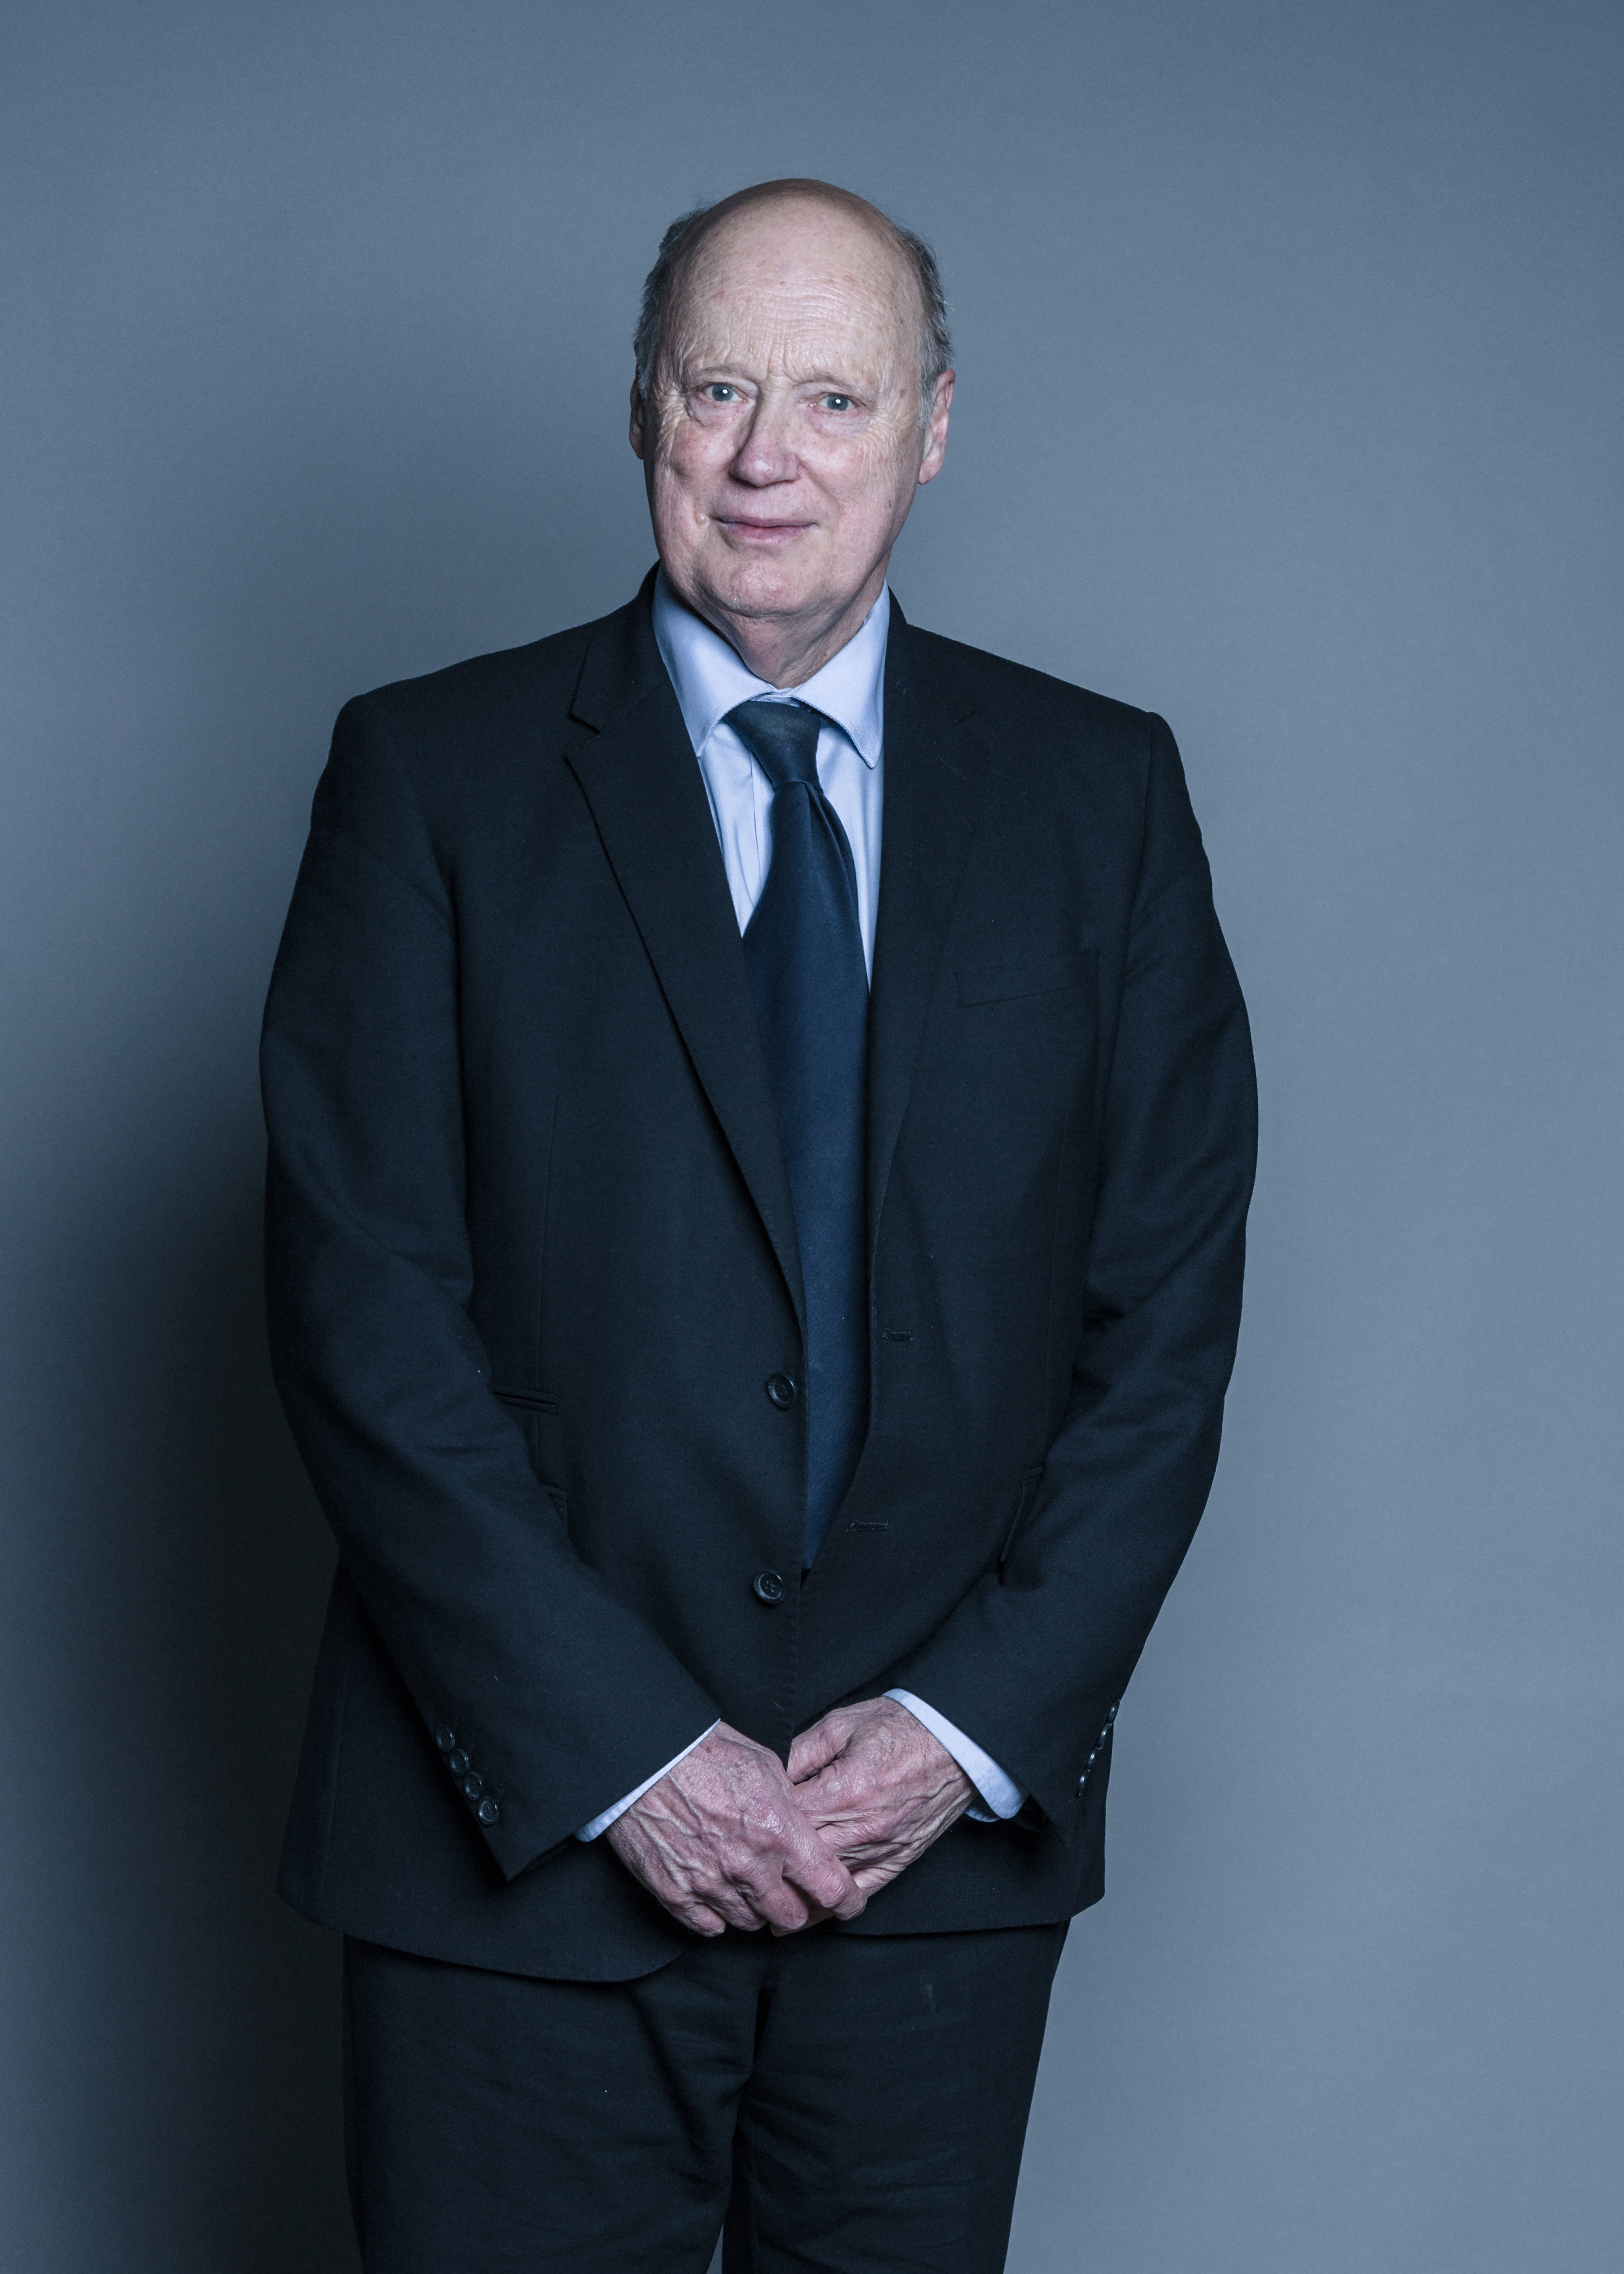 Official portrait for Viscount Hanworth - MPs and Lords - UK Parliament